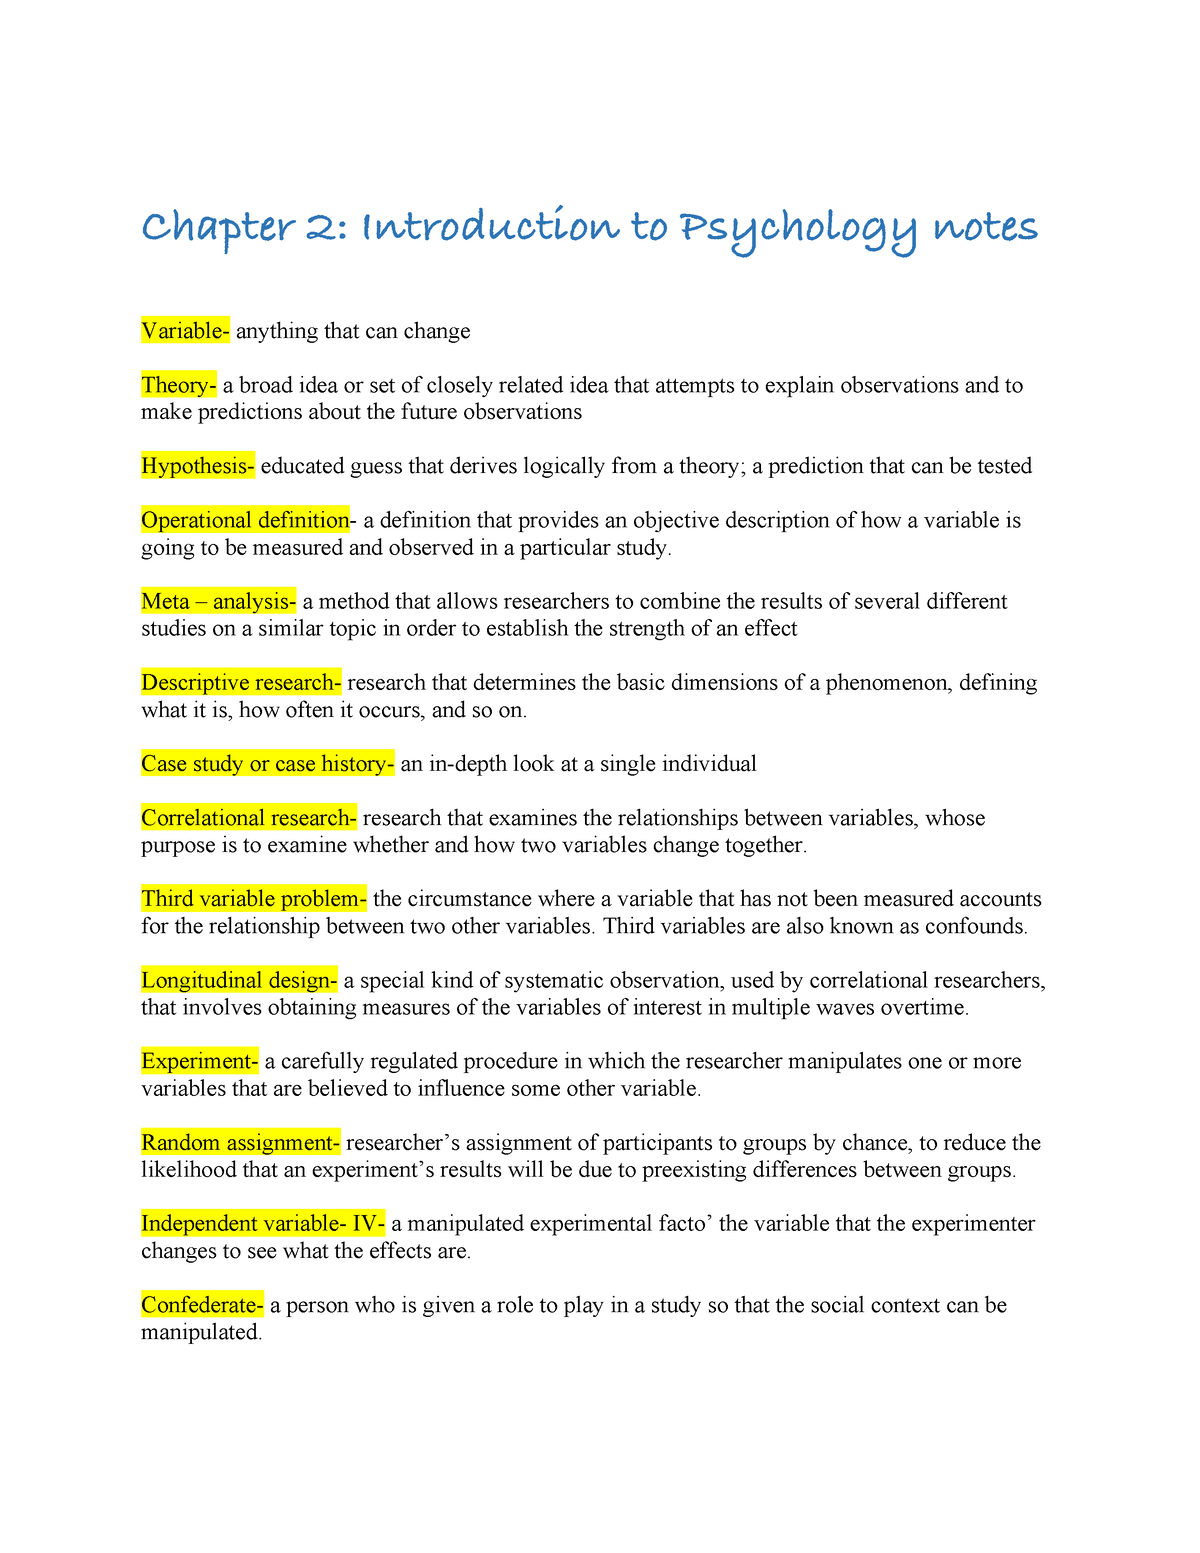 Chapter 2 Psychology Notes Chapter 2 Introduction To Psychology Notes Variable Anything That 